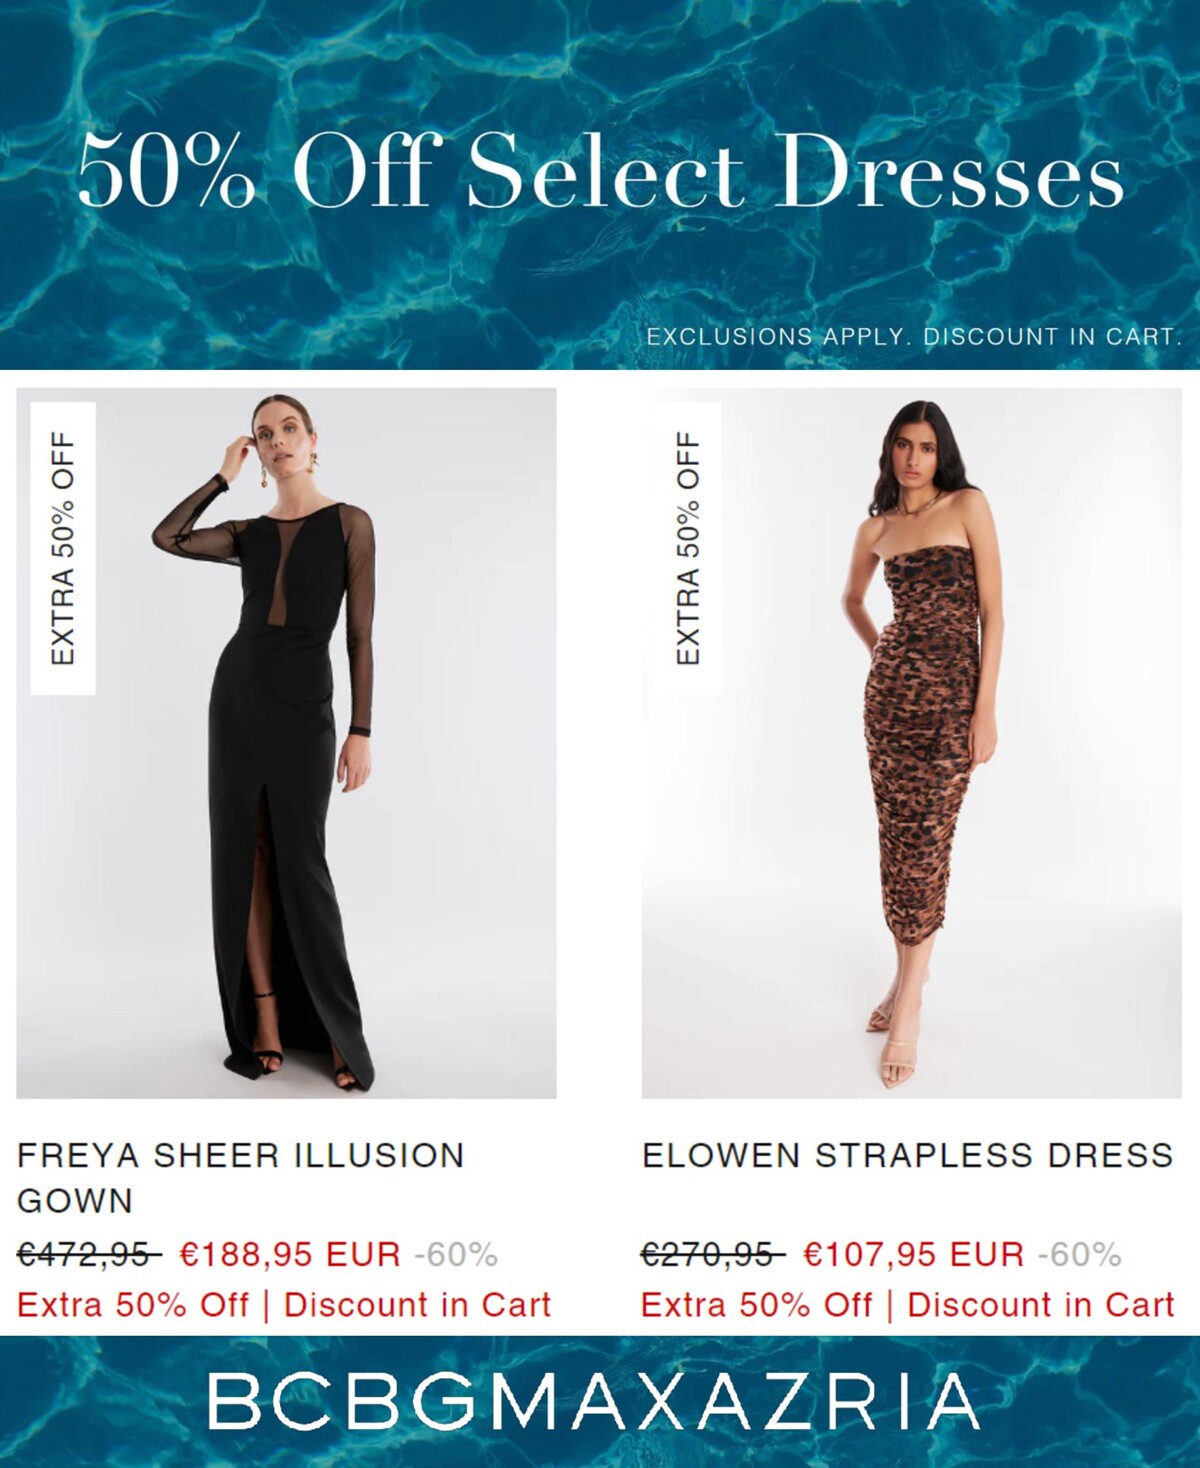 Catalogue 50% Off Select Dresses, page 00006